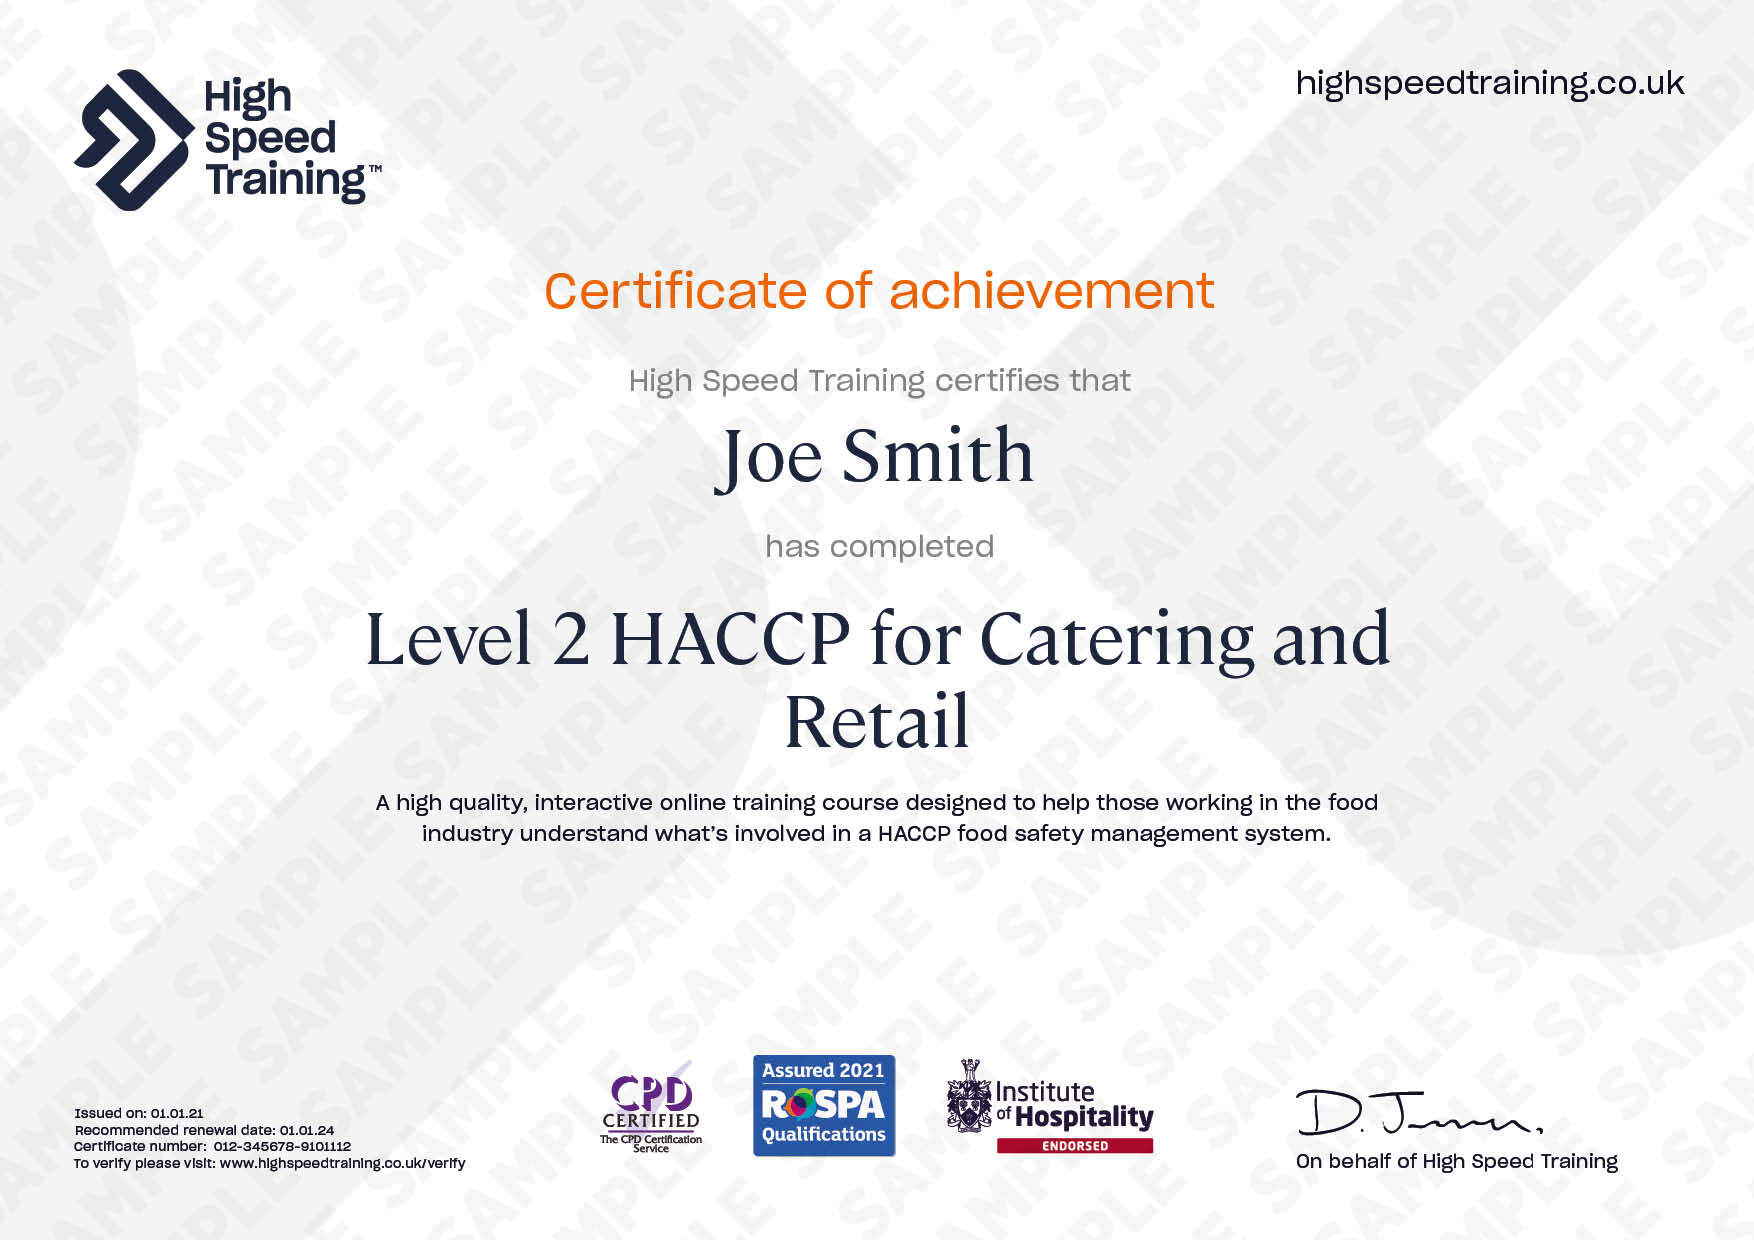 Level 2 HACCP for Catering and Retail